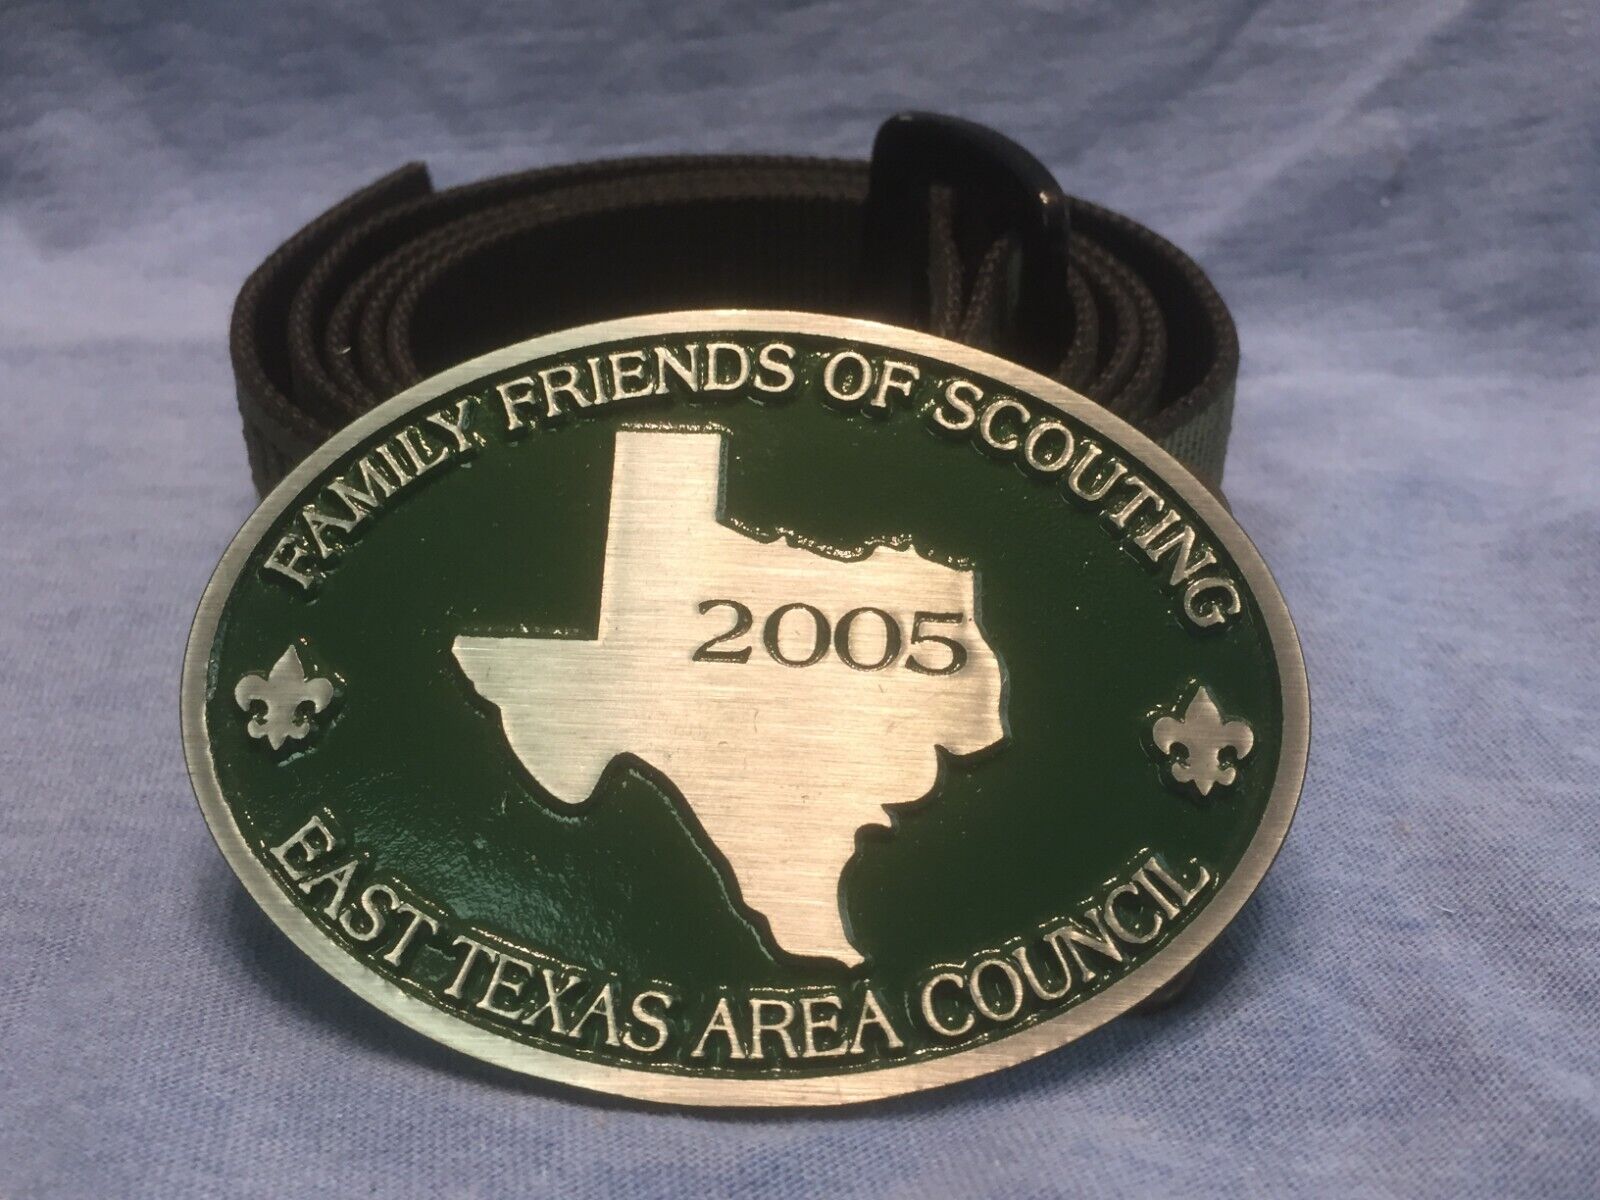 EAST TEXAS AREA BOY SCOUT BRASS BUCKLE - MADE IN USA